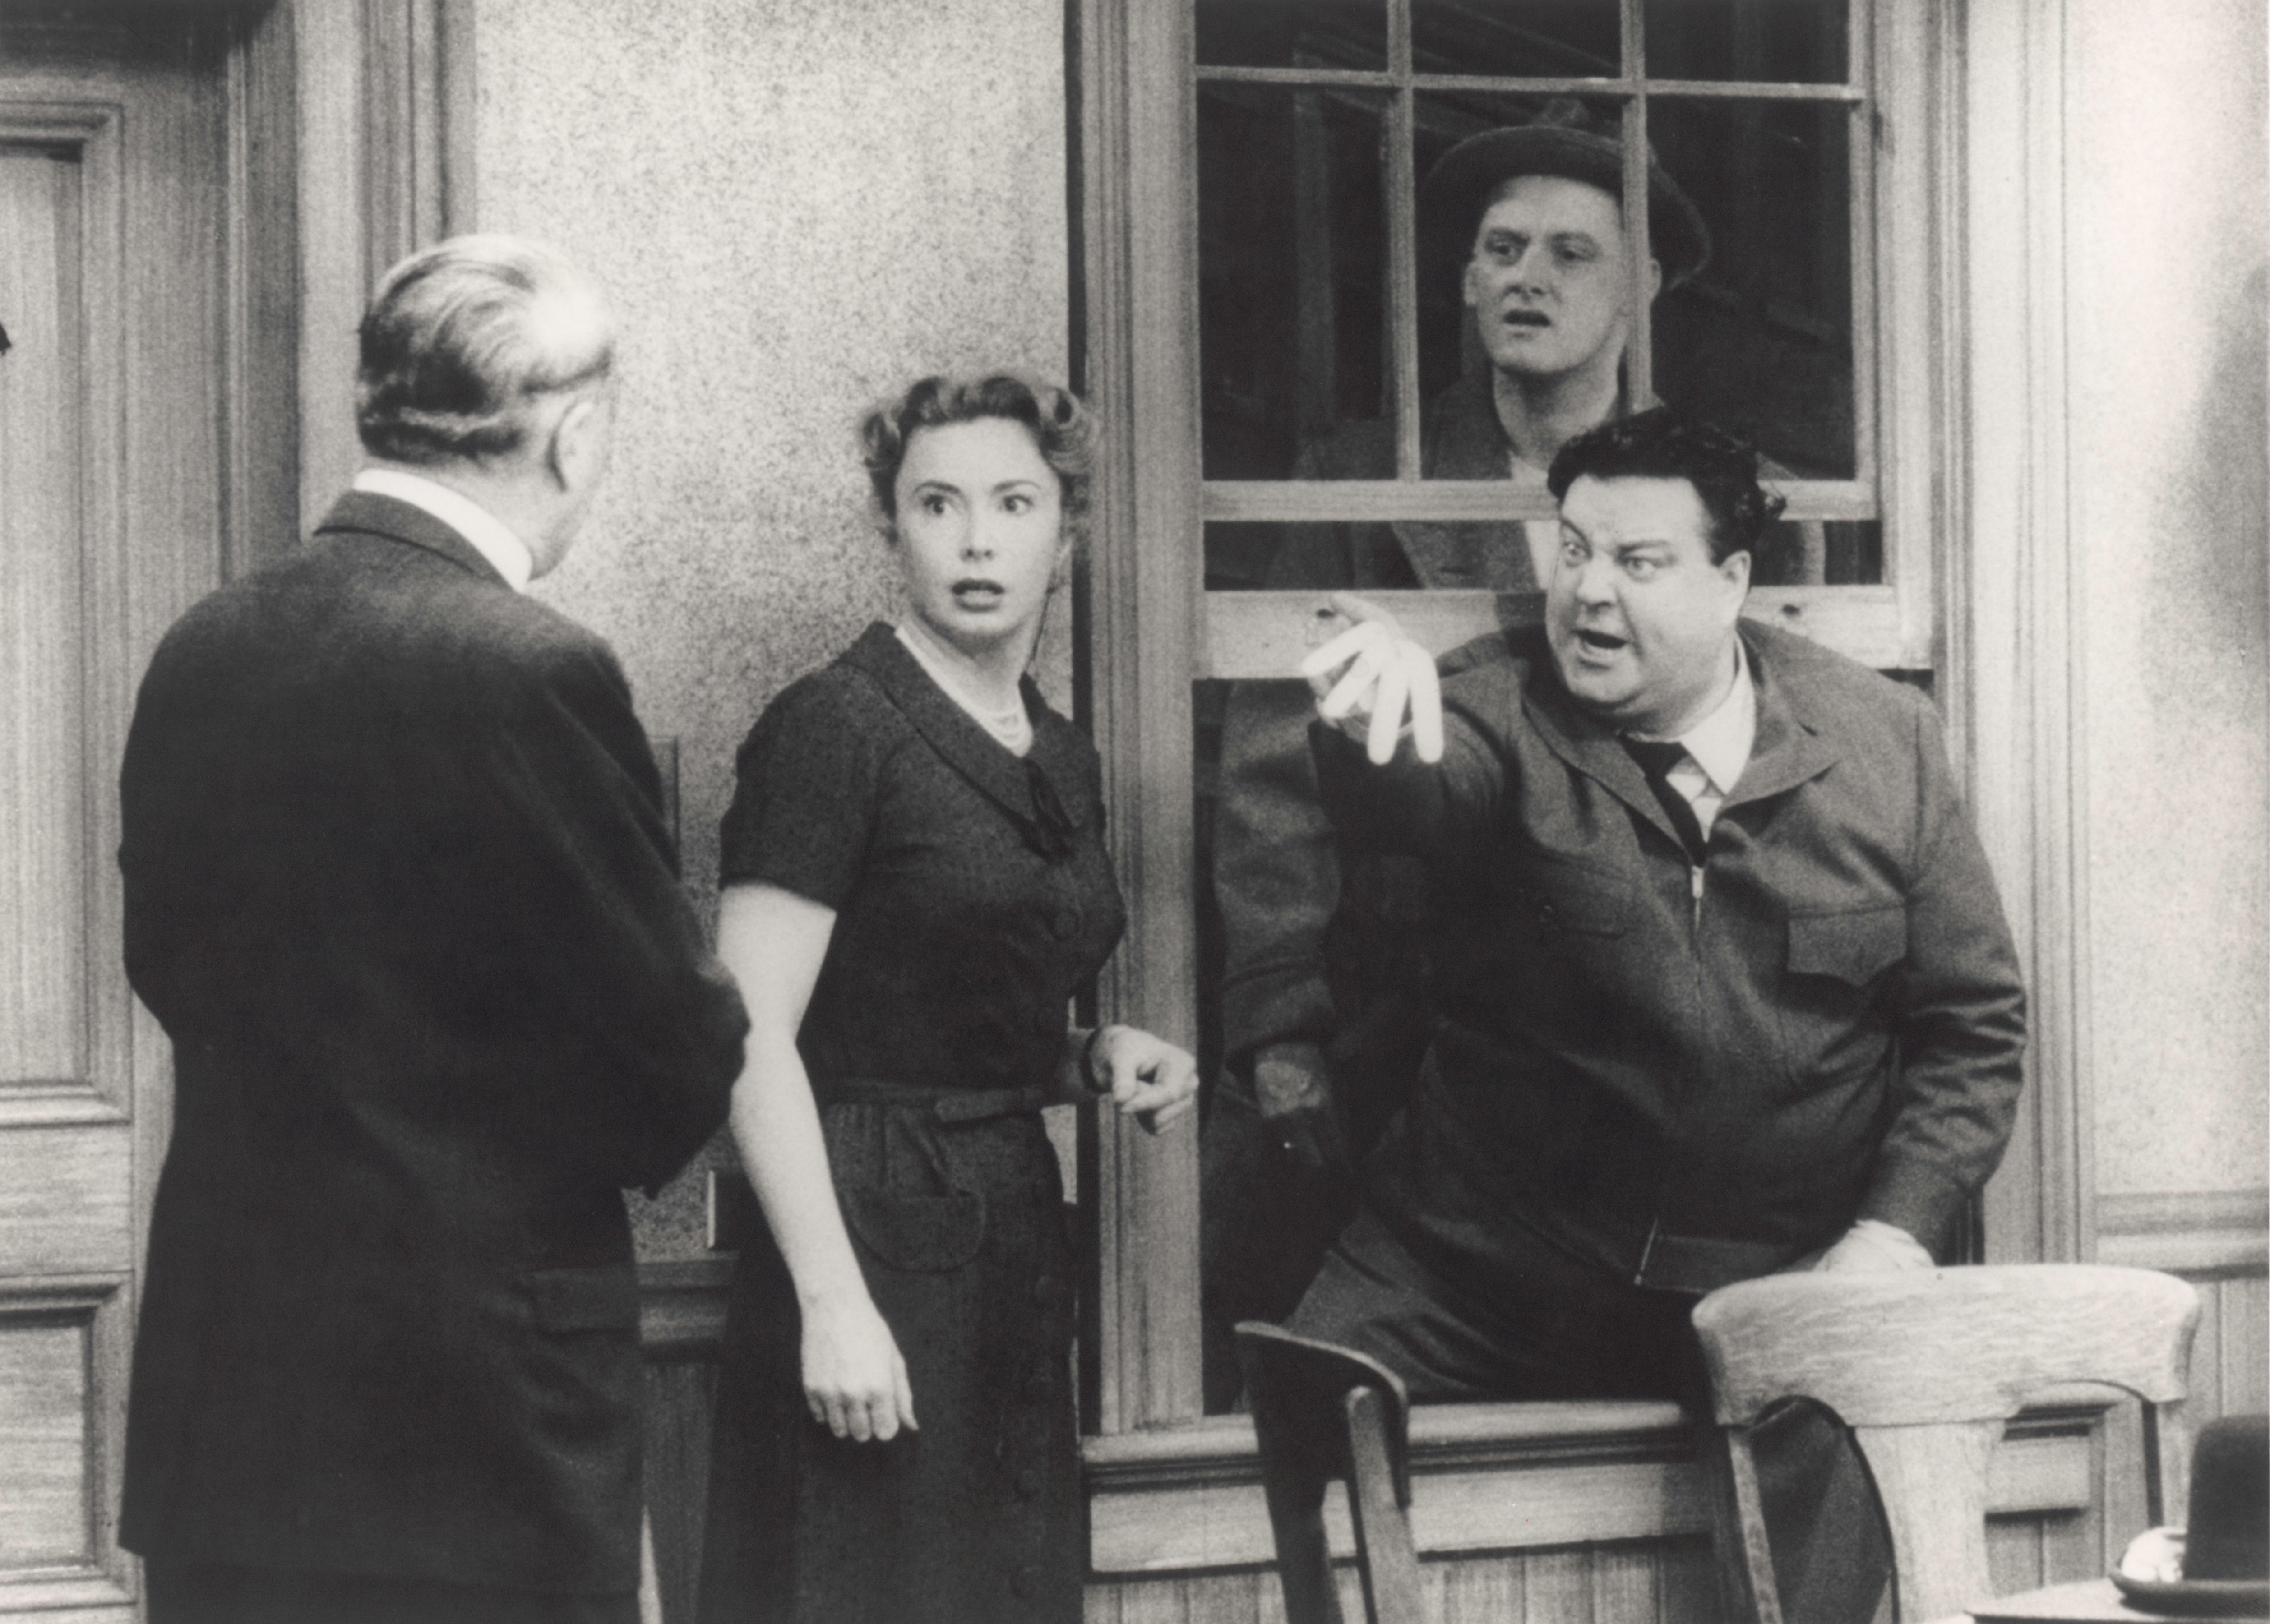 Still of Jackie Gleason, Art Carney and Audrey Meadows in The Honeymooners (1955)